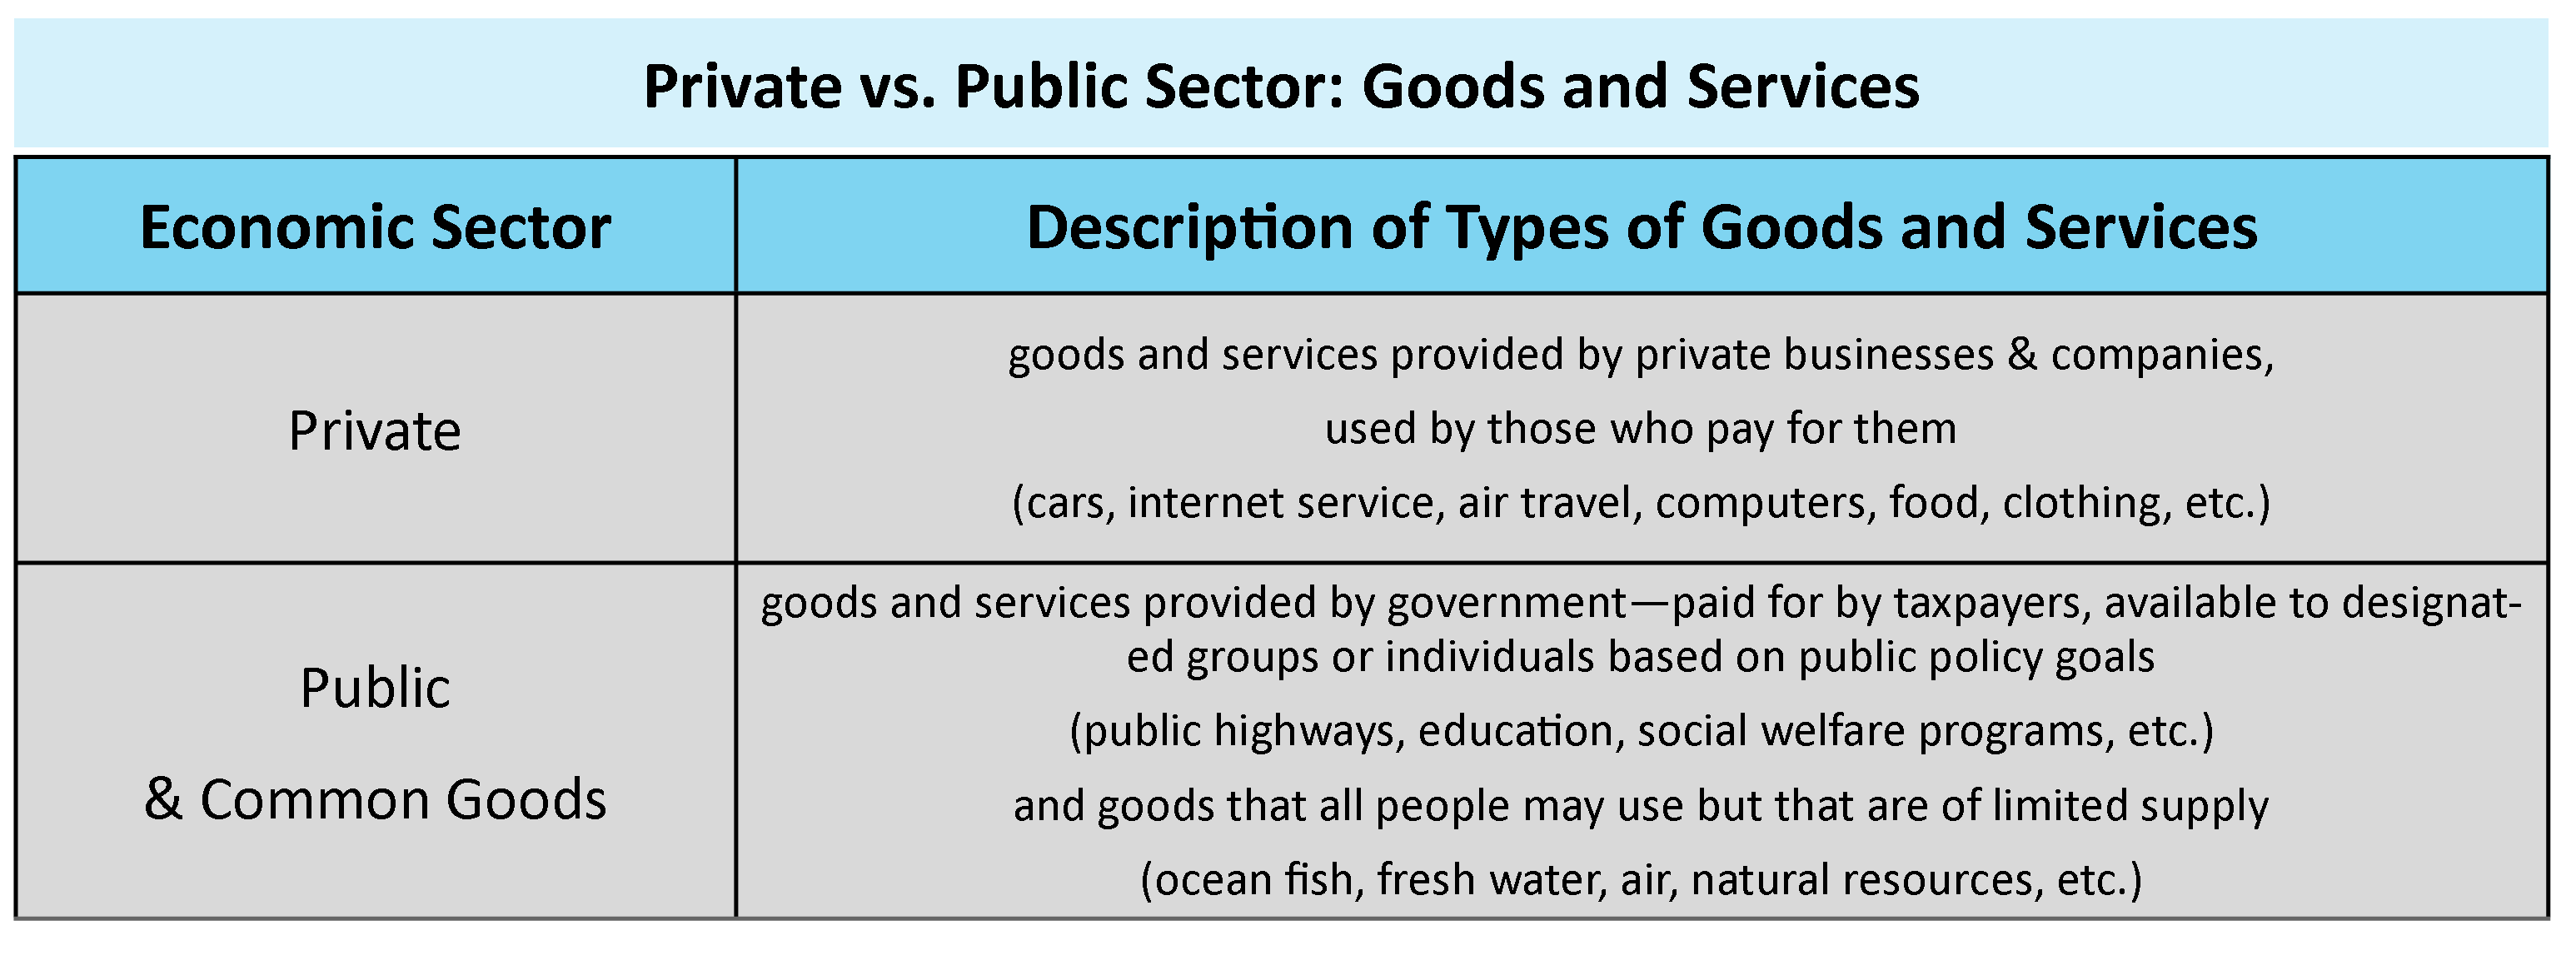 Chart revisiting the definitions of private versus public sector goods and services.